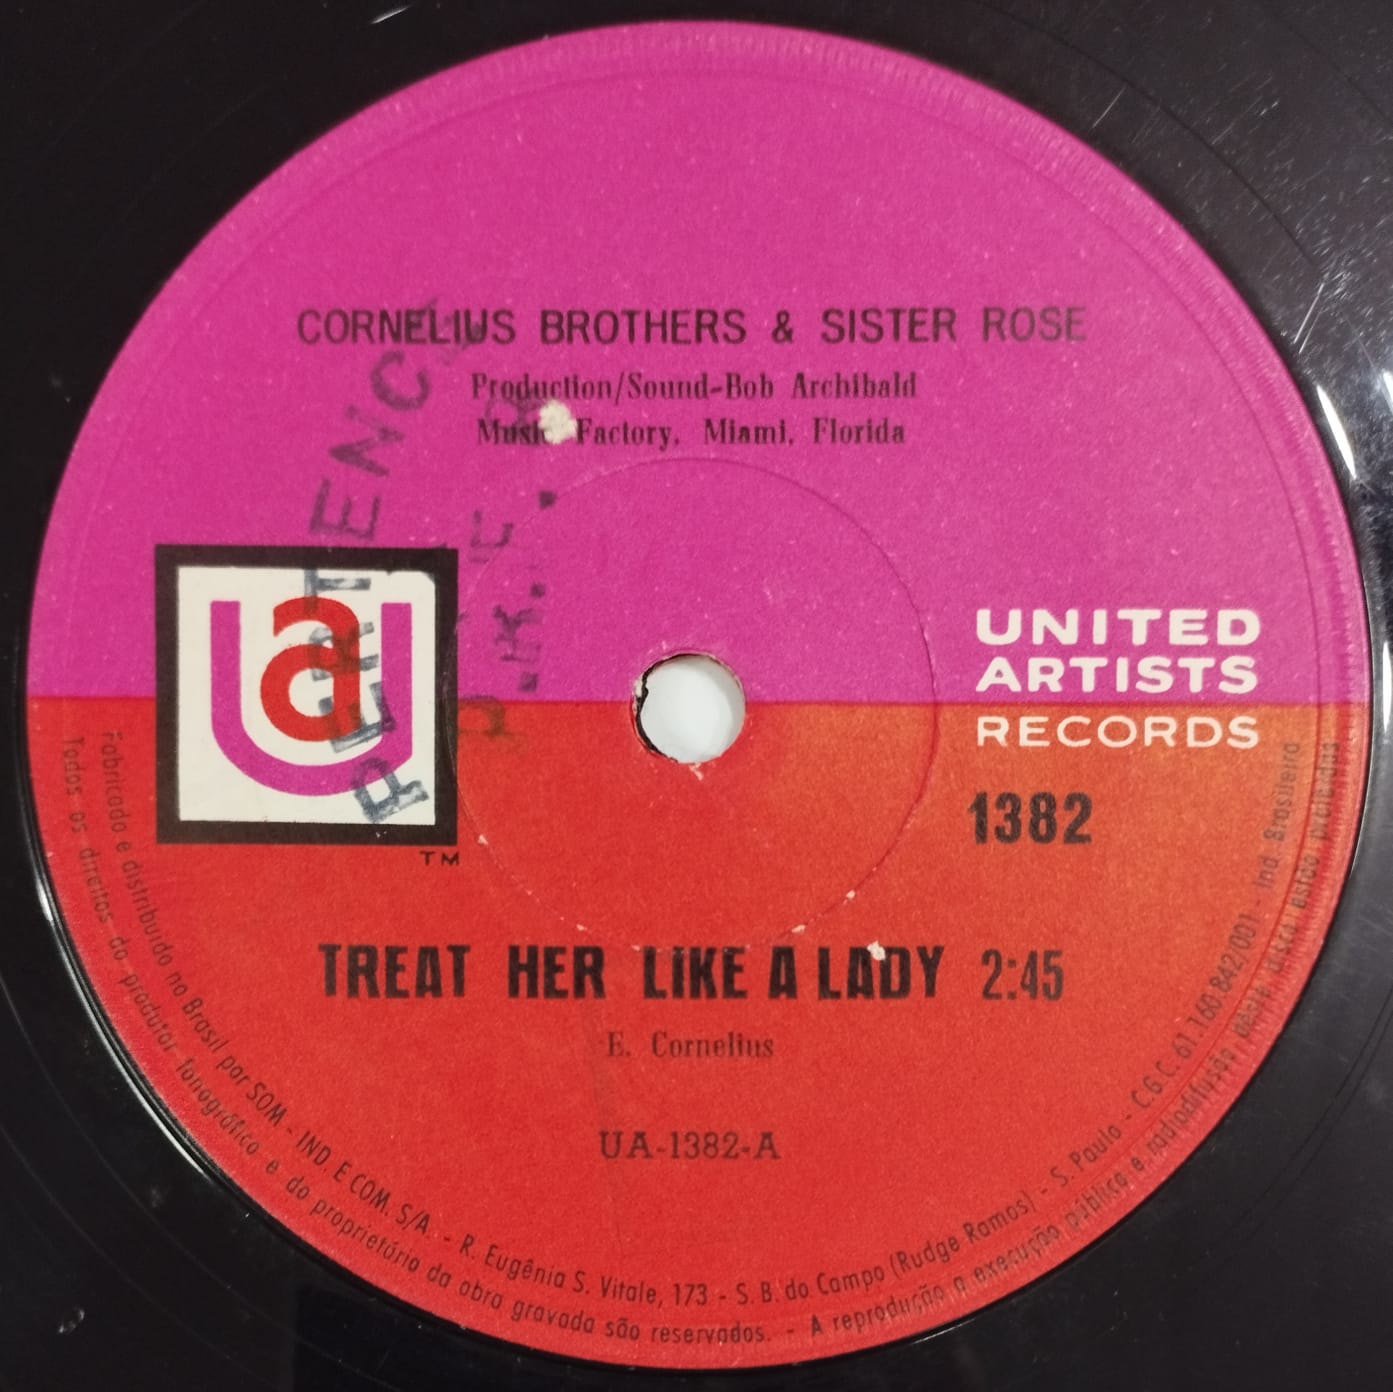 Cornelius Brothers & Sister Rose - Treat Her Like A Lady (Compacto)